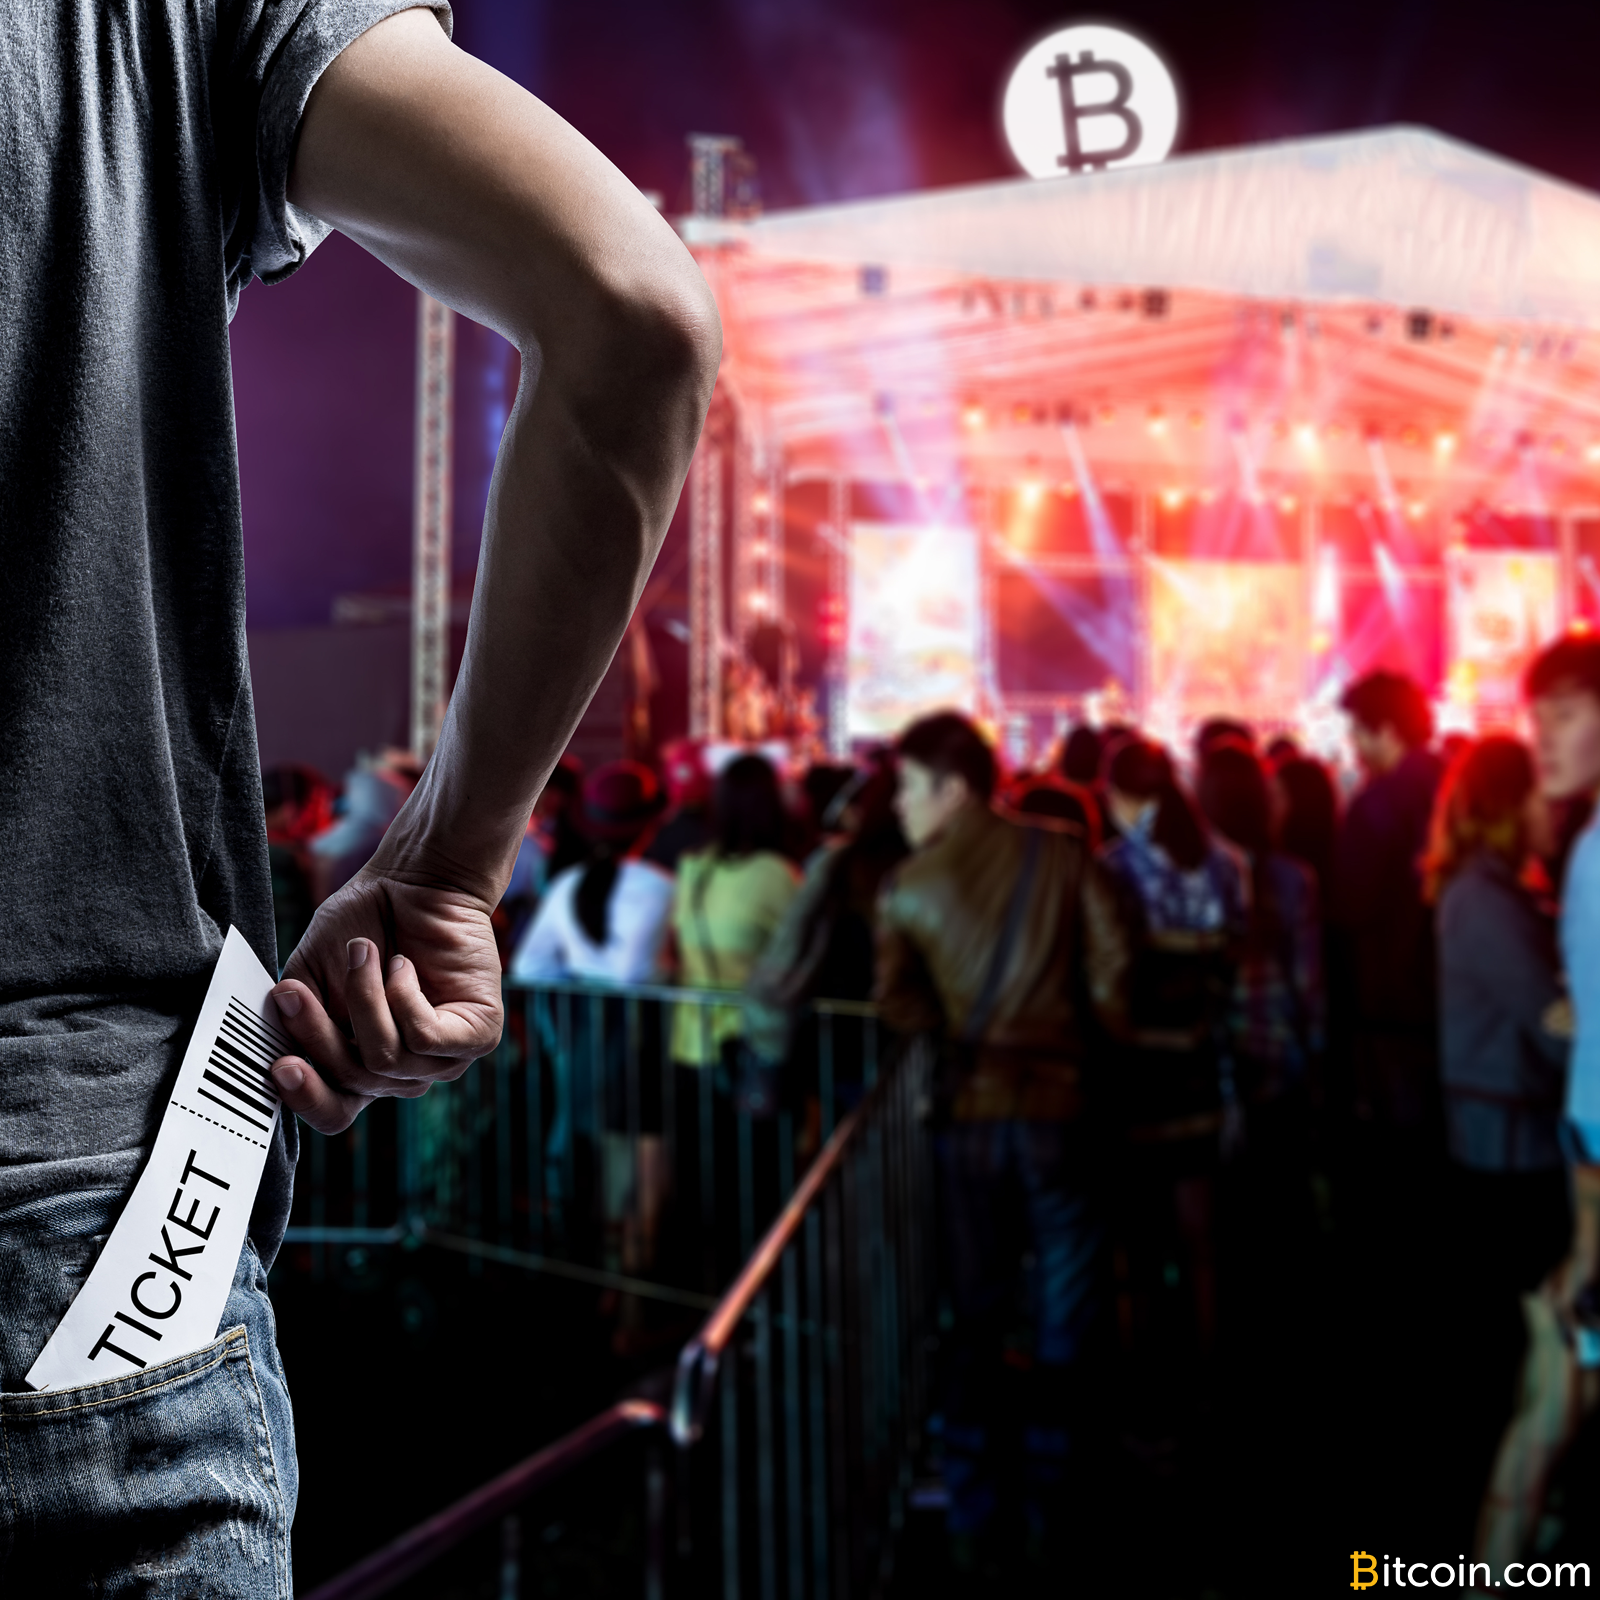 Japan's Largest C2C Ticket Marketplace with 5 Million Users Accepts Bitcoin